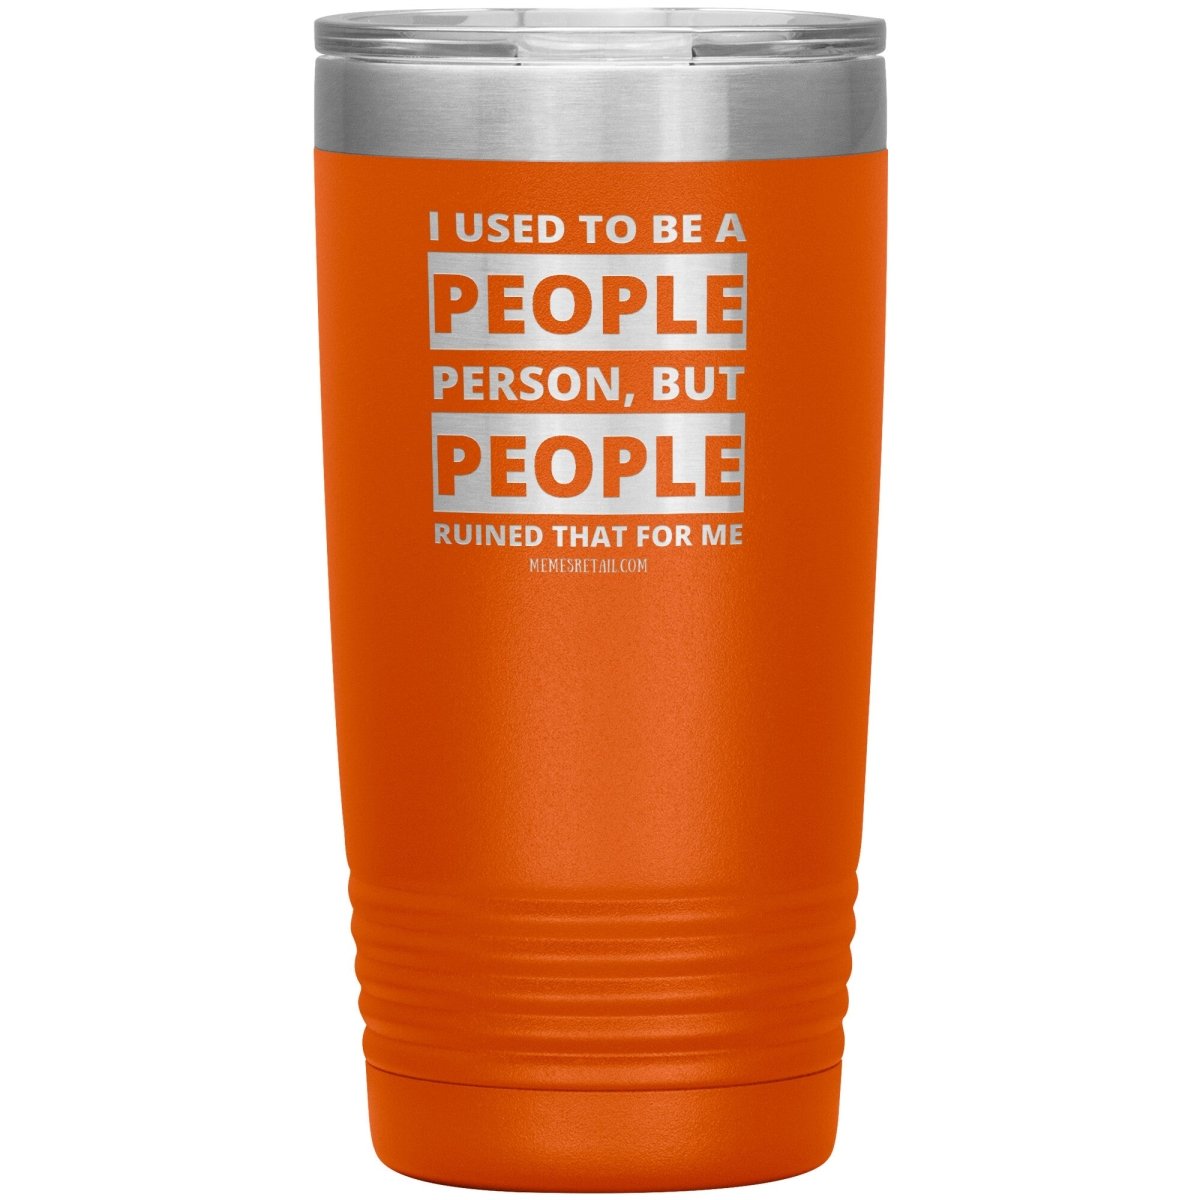 I Used To Be A People Person, But People Ruined That For Me Tumblers, 20oz Insulated Tumbler / Orange - MemesRetail.com